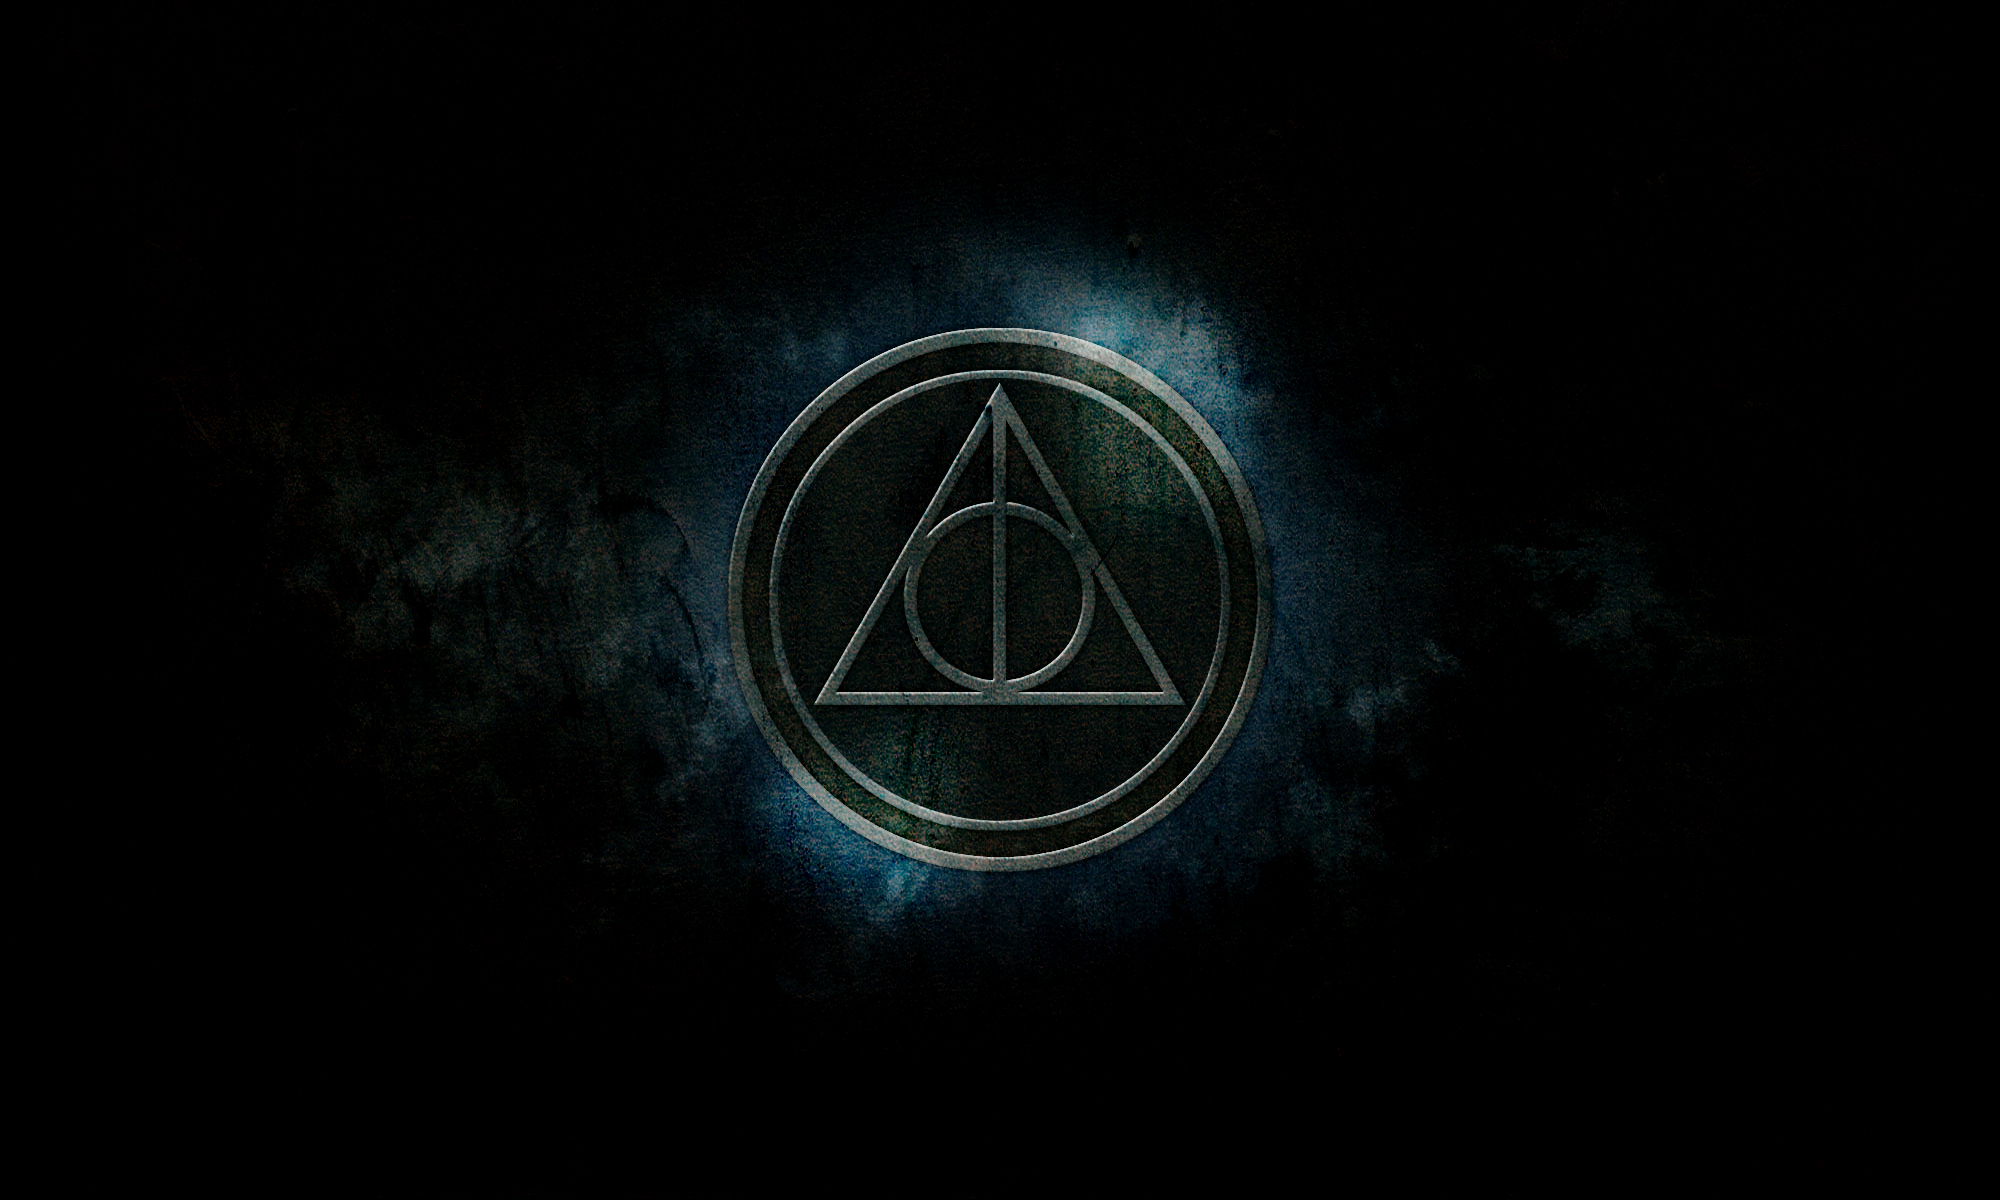 Harry Potter Deathly Hallows Wallpaper by MrStonesley on DeviantArt